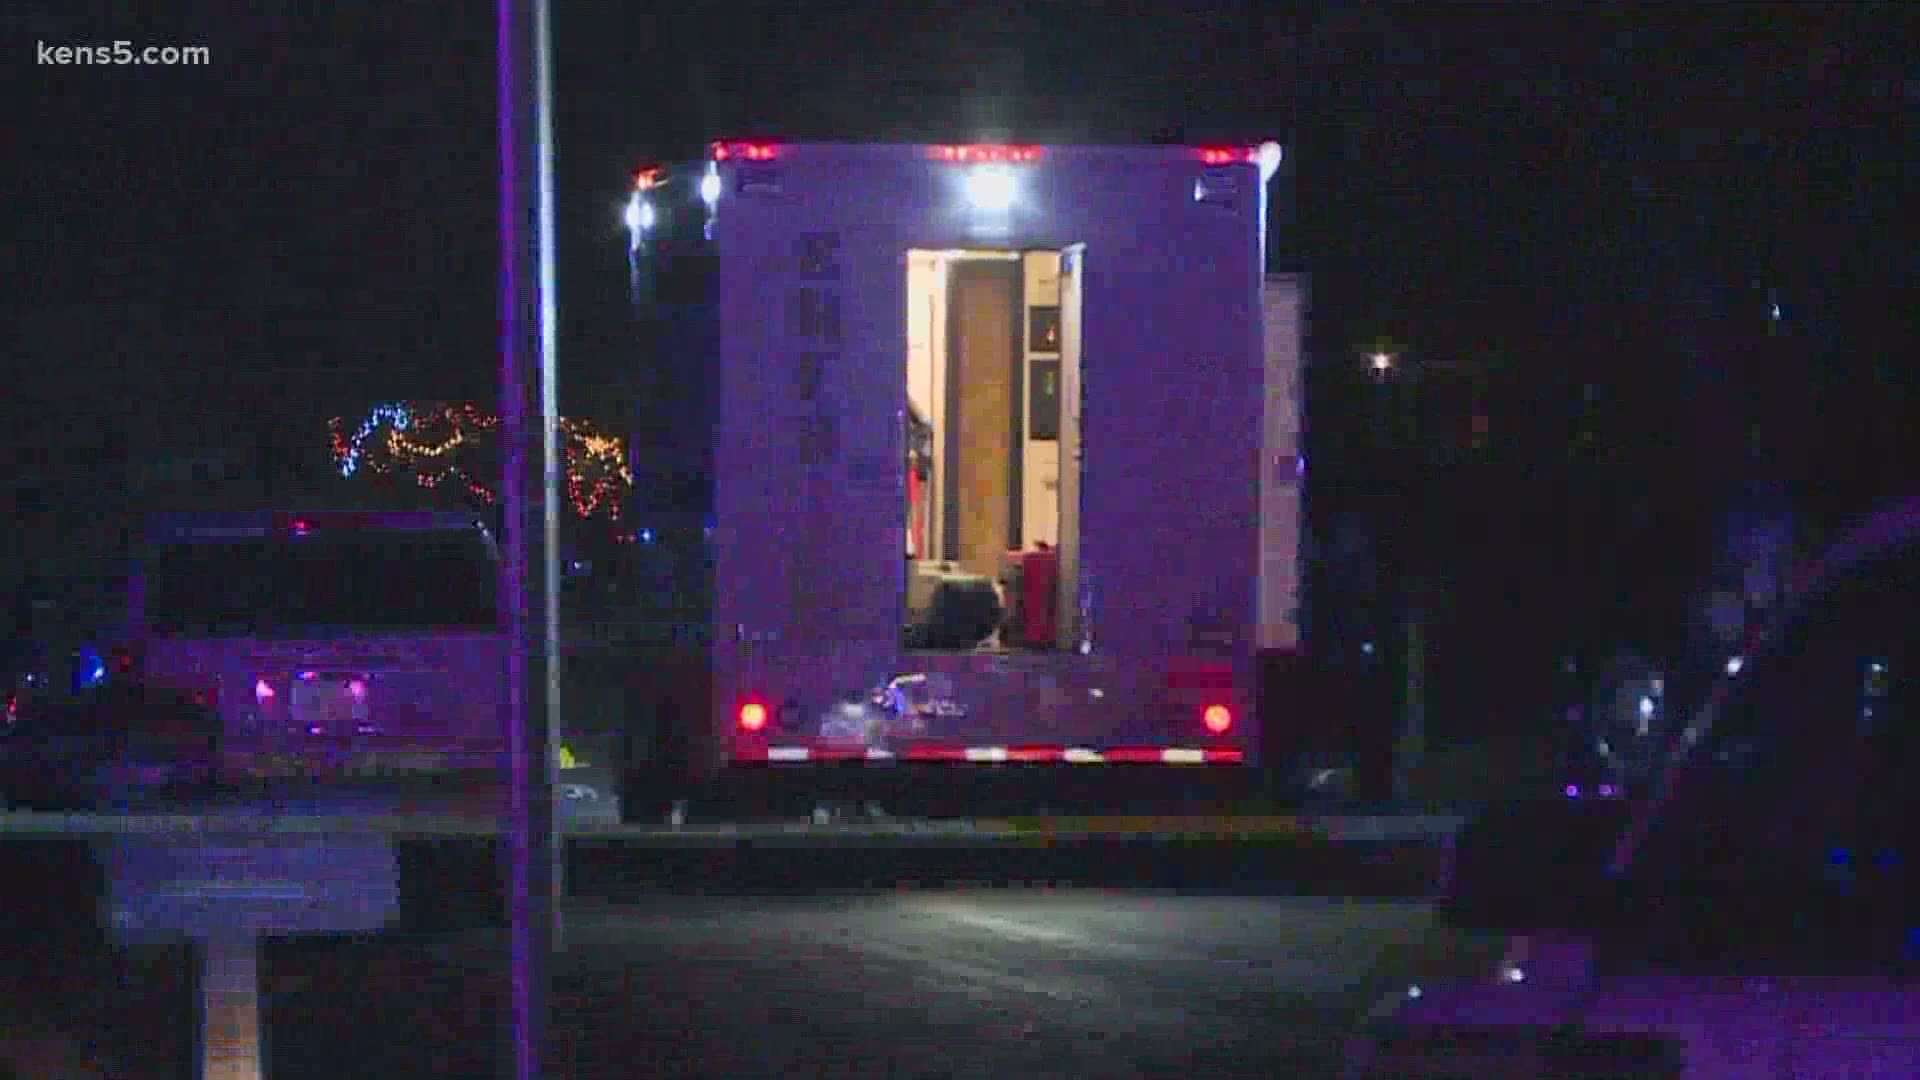 Authorities say two people, ages 20 and 14, were killed in a drug deal gone bad Thursday night.